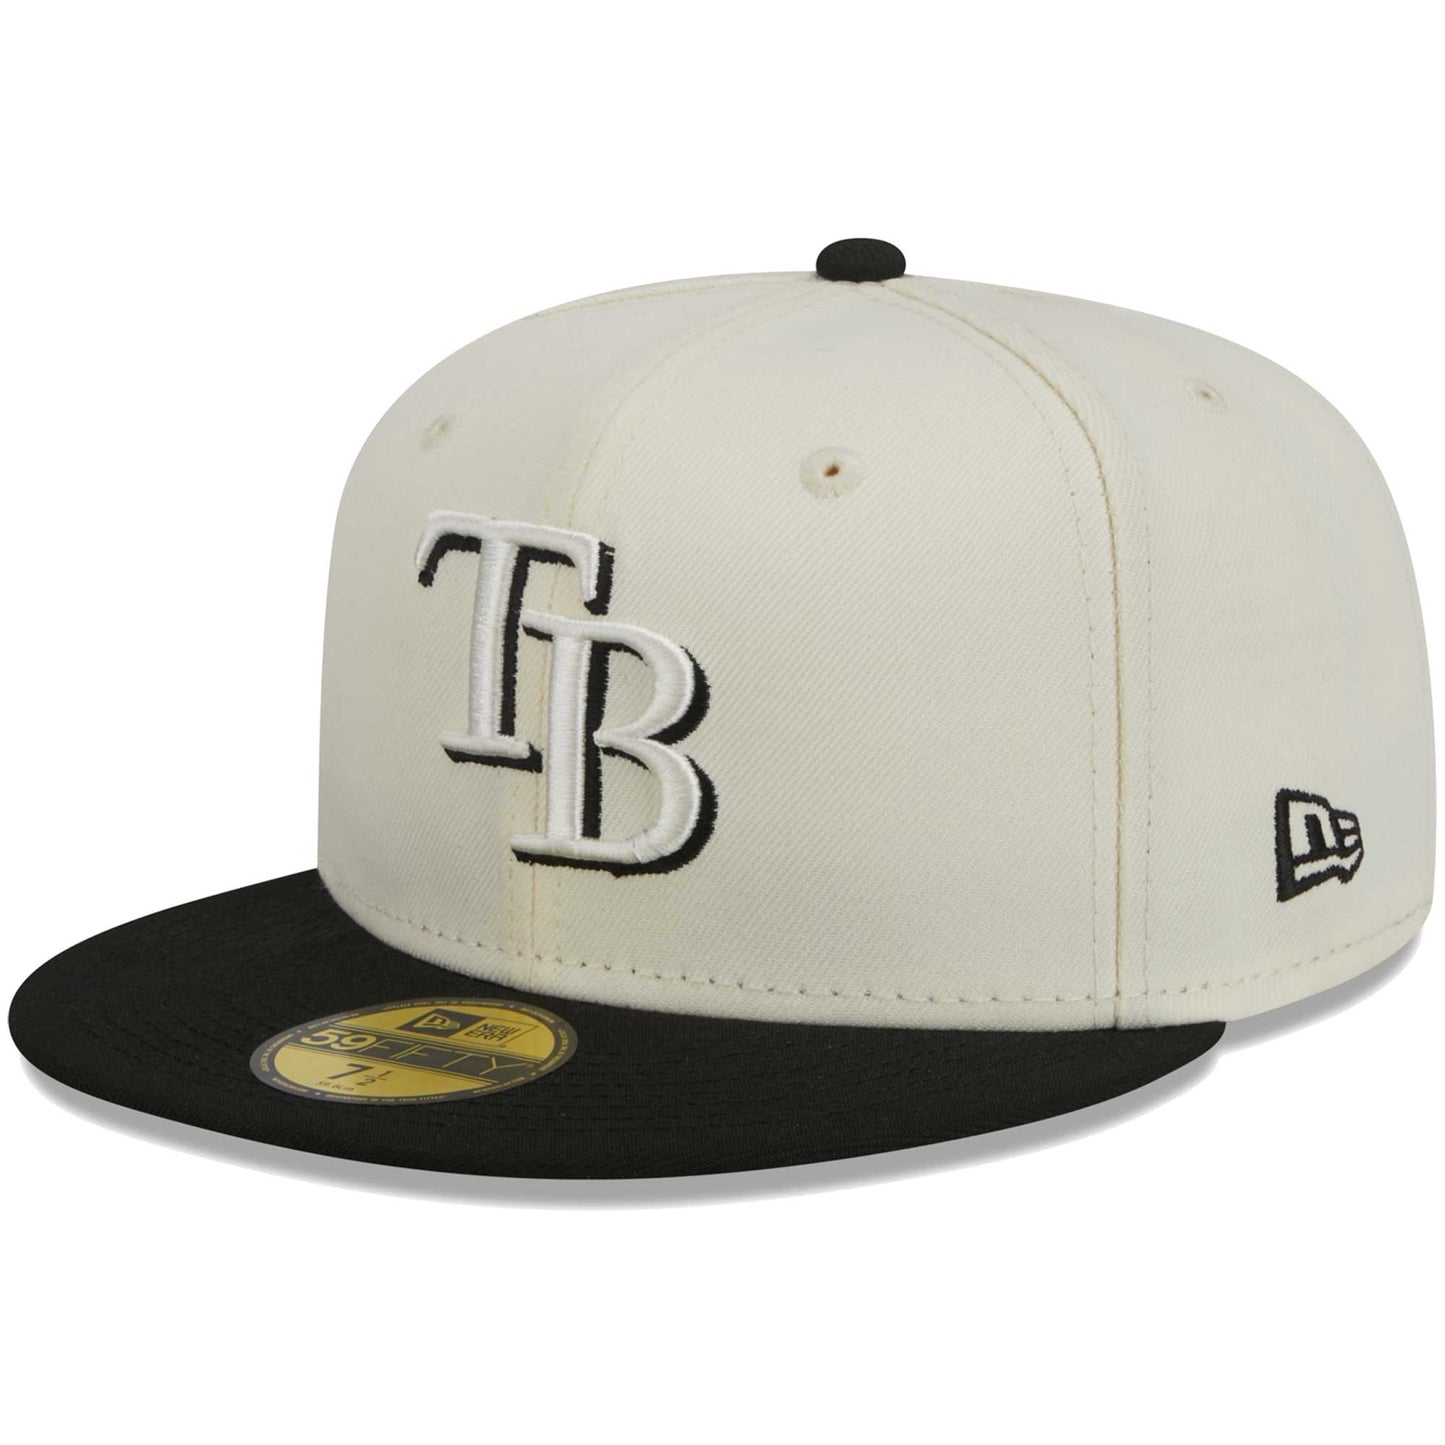 Tampa Bay Rays New Era Chrome 59FIFTY Fitted Hat - Stone/Black